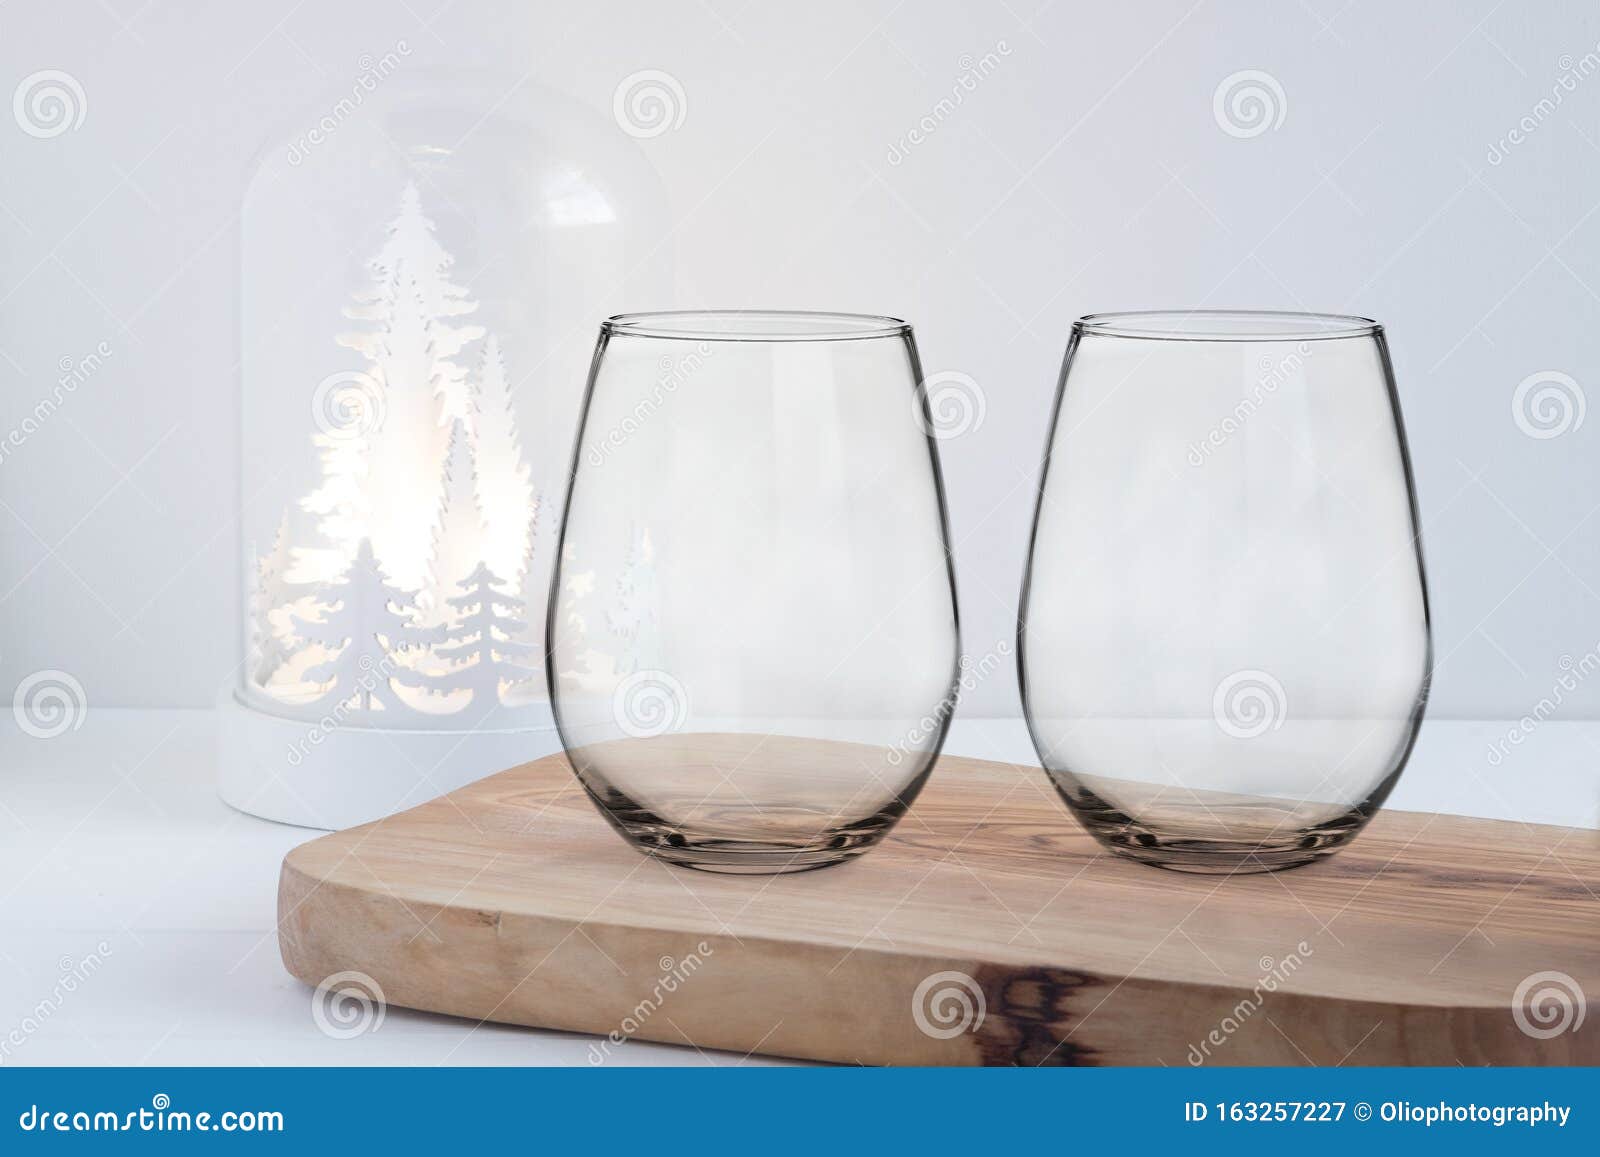 https://thumbs.dreamstime.com/z/white-mug-mockup-feminine-style-pretty-christmas-styled-stemless-wine-glass-great-overlaying-your-custom-quotes-decals-163257227.jpg